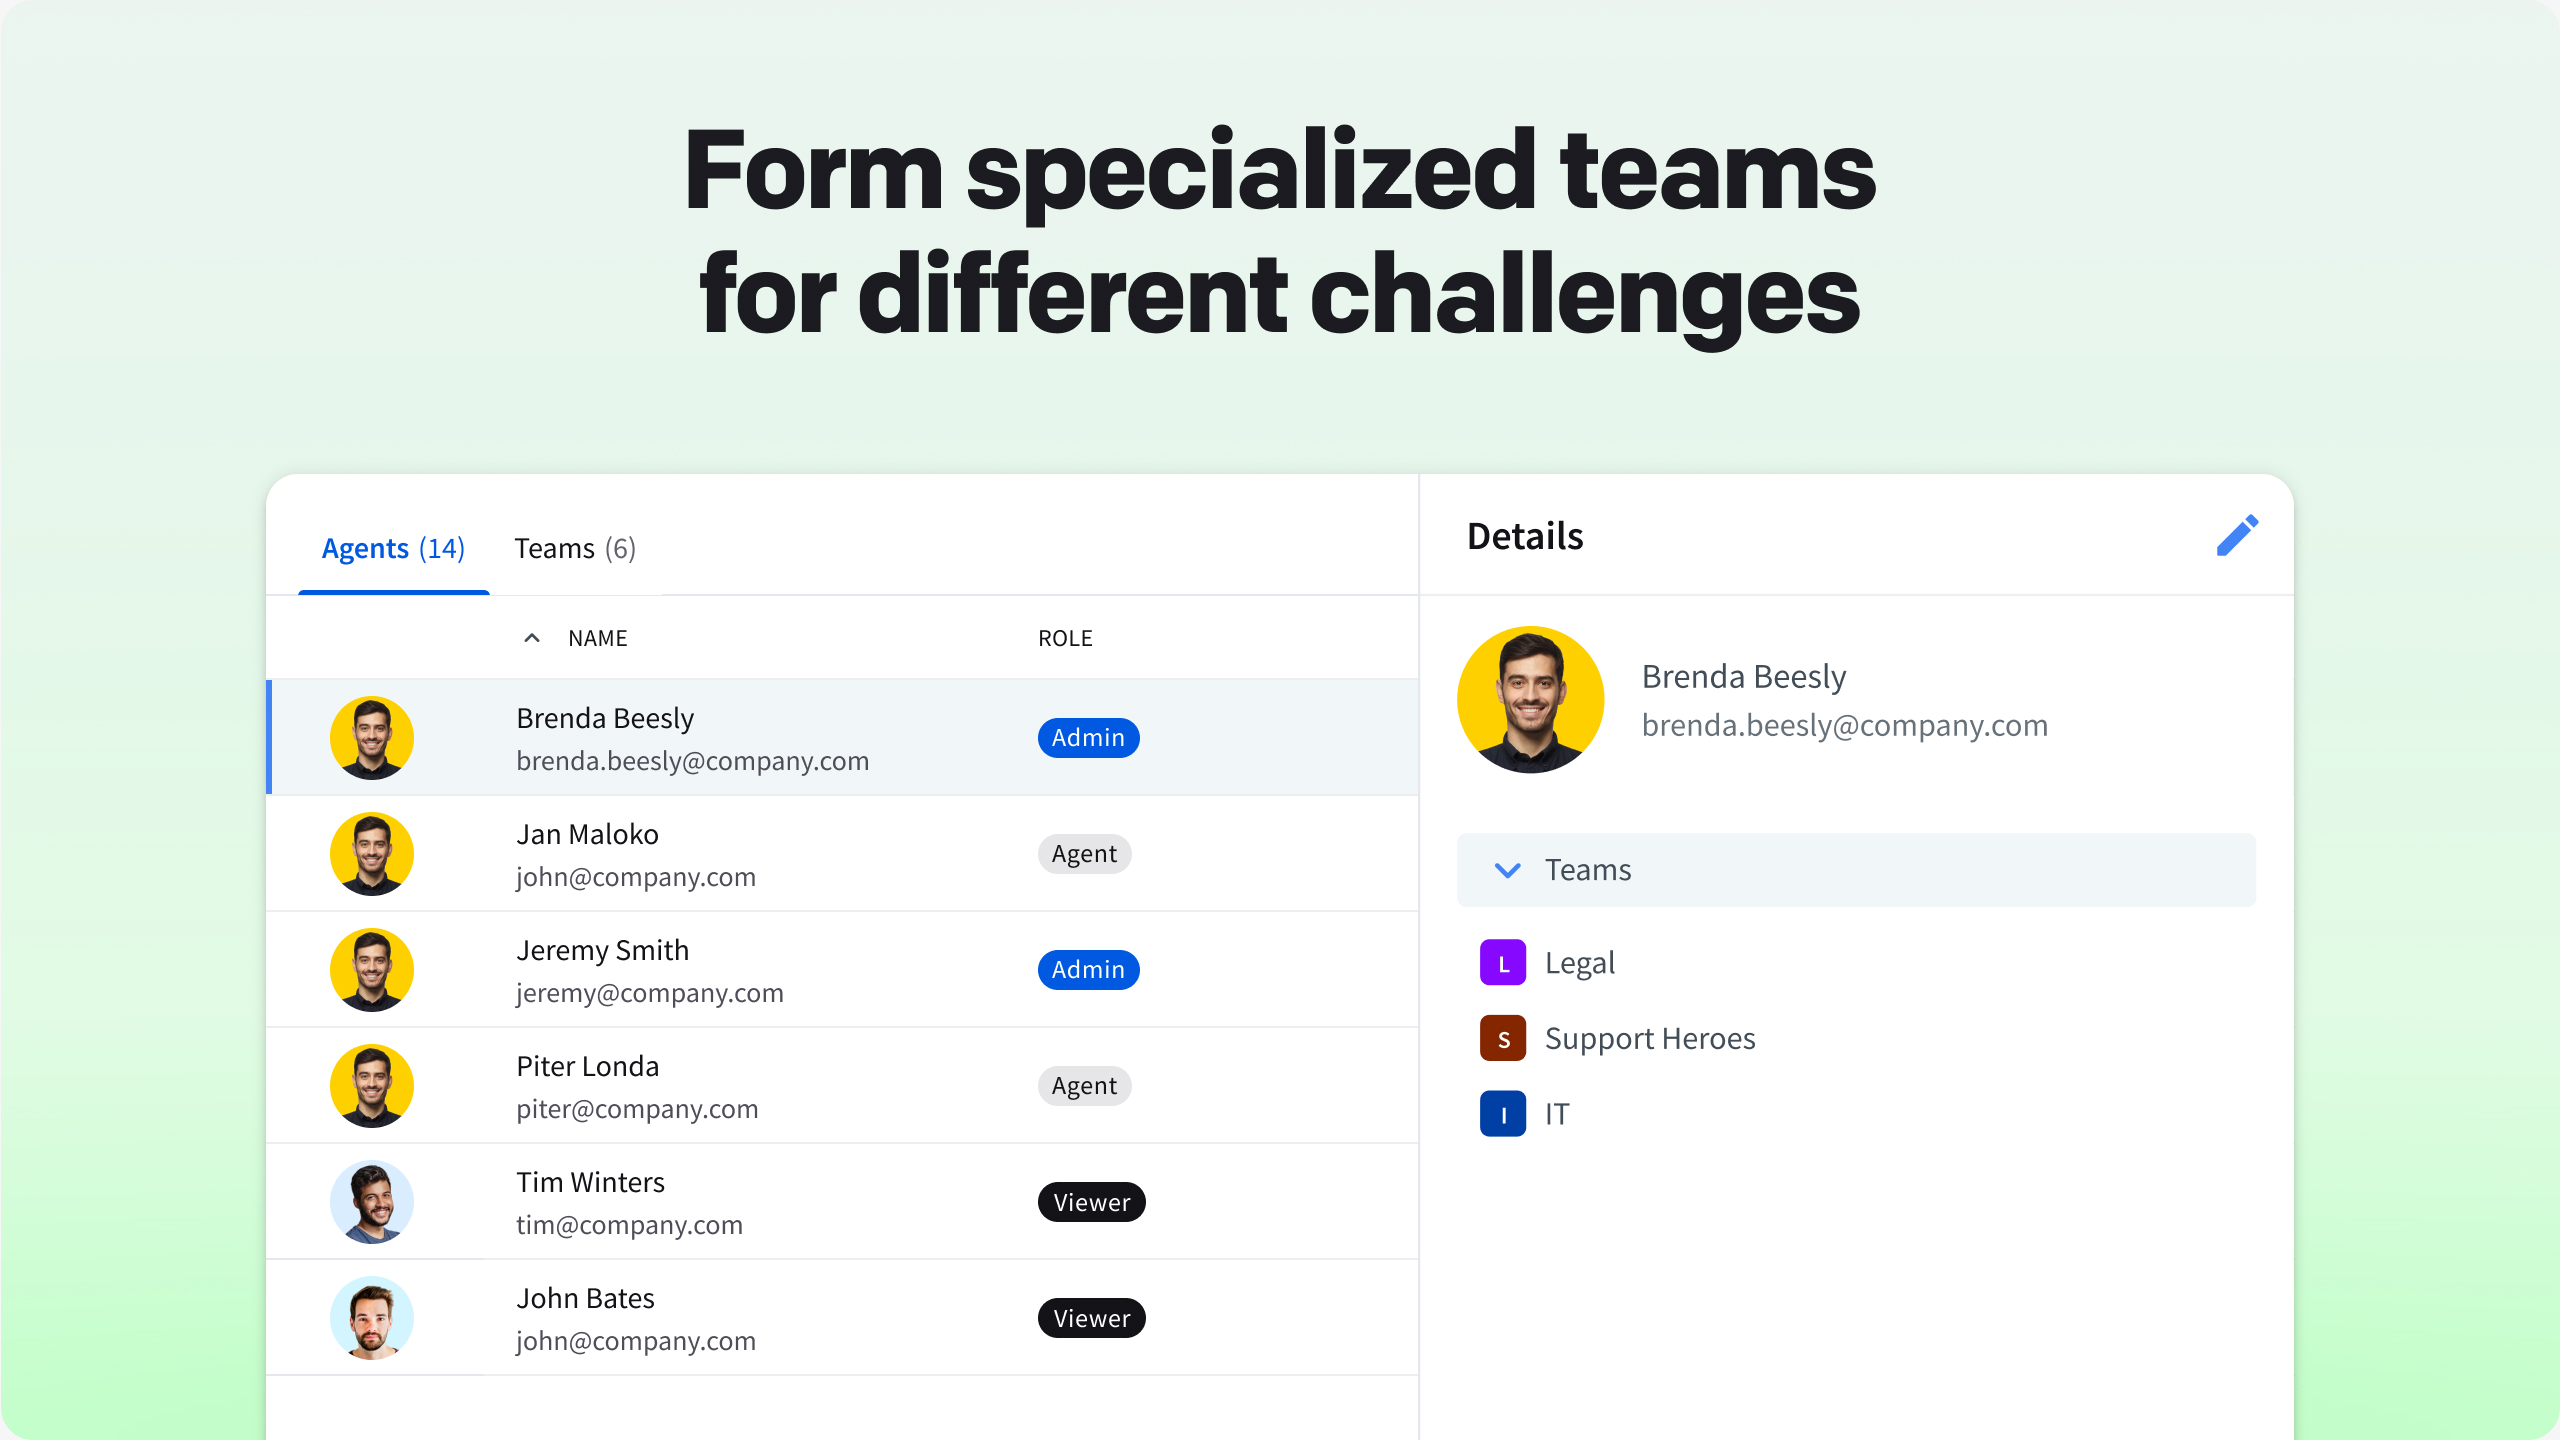 Form specialized teams for different challenges